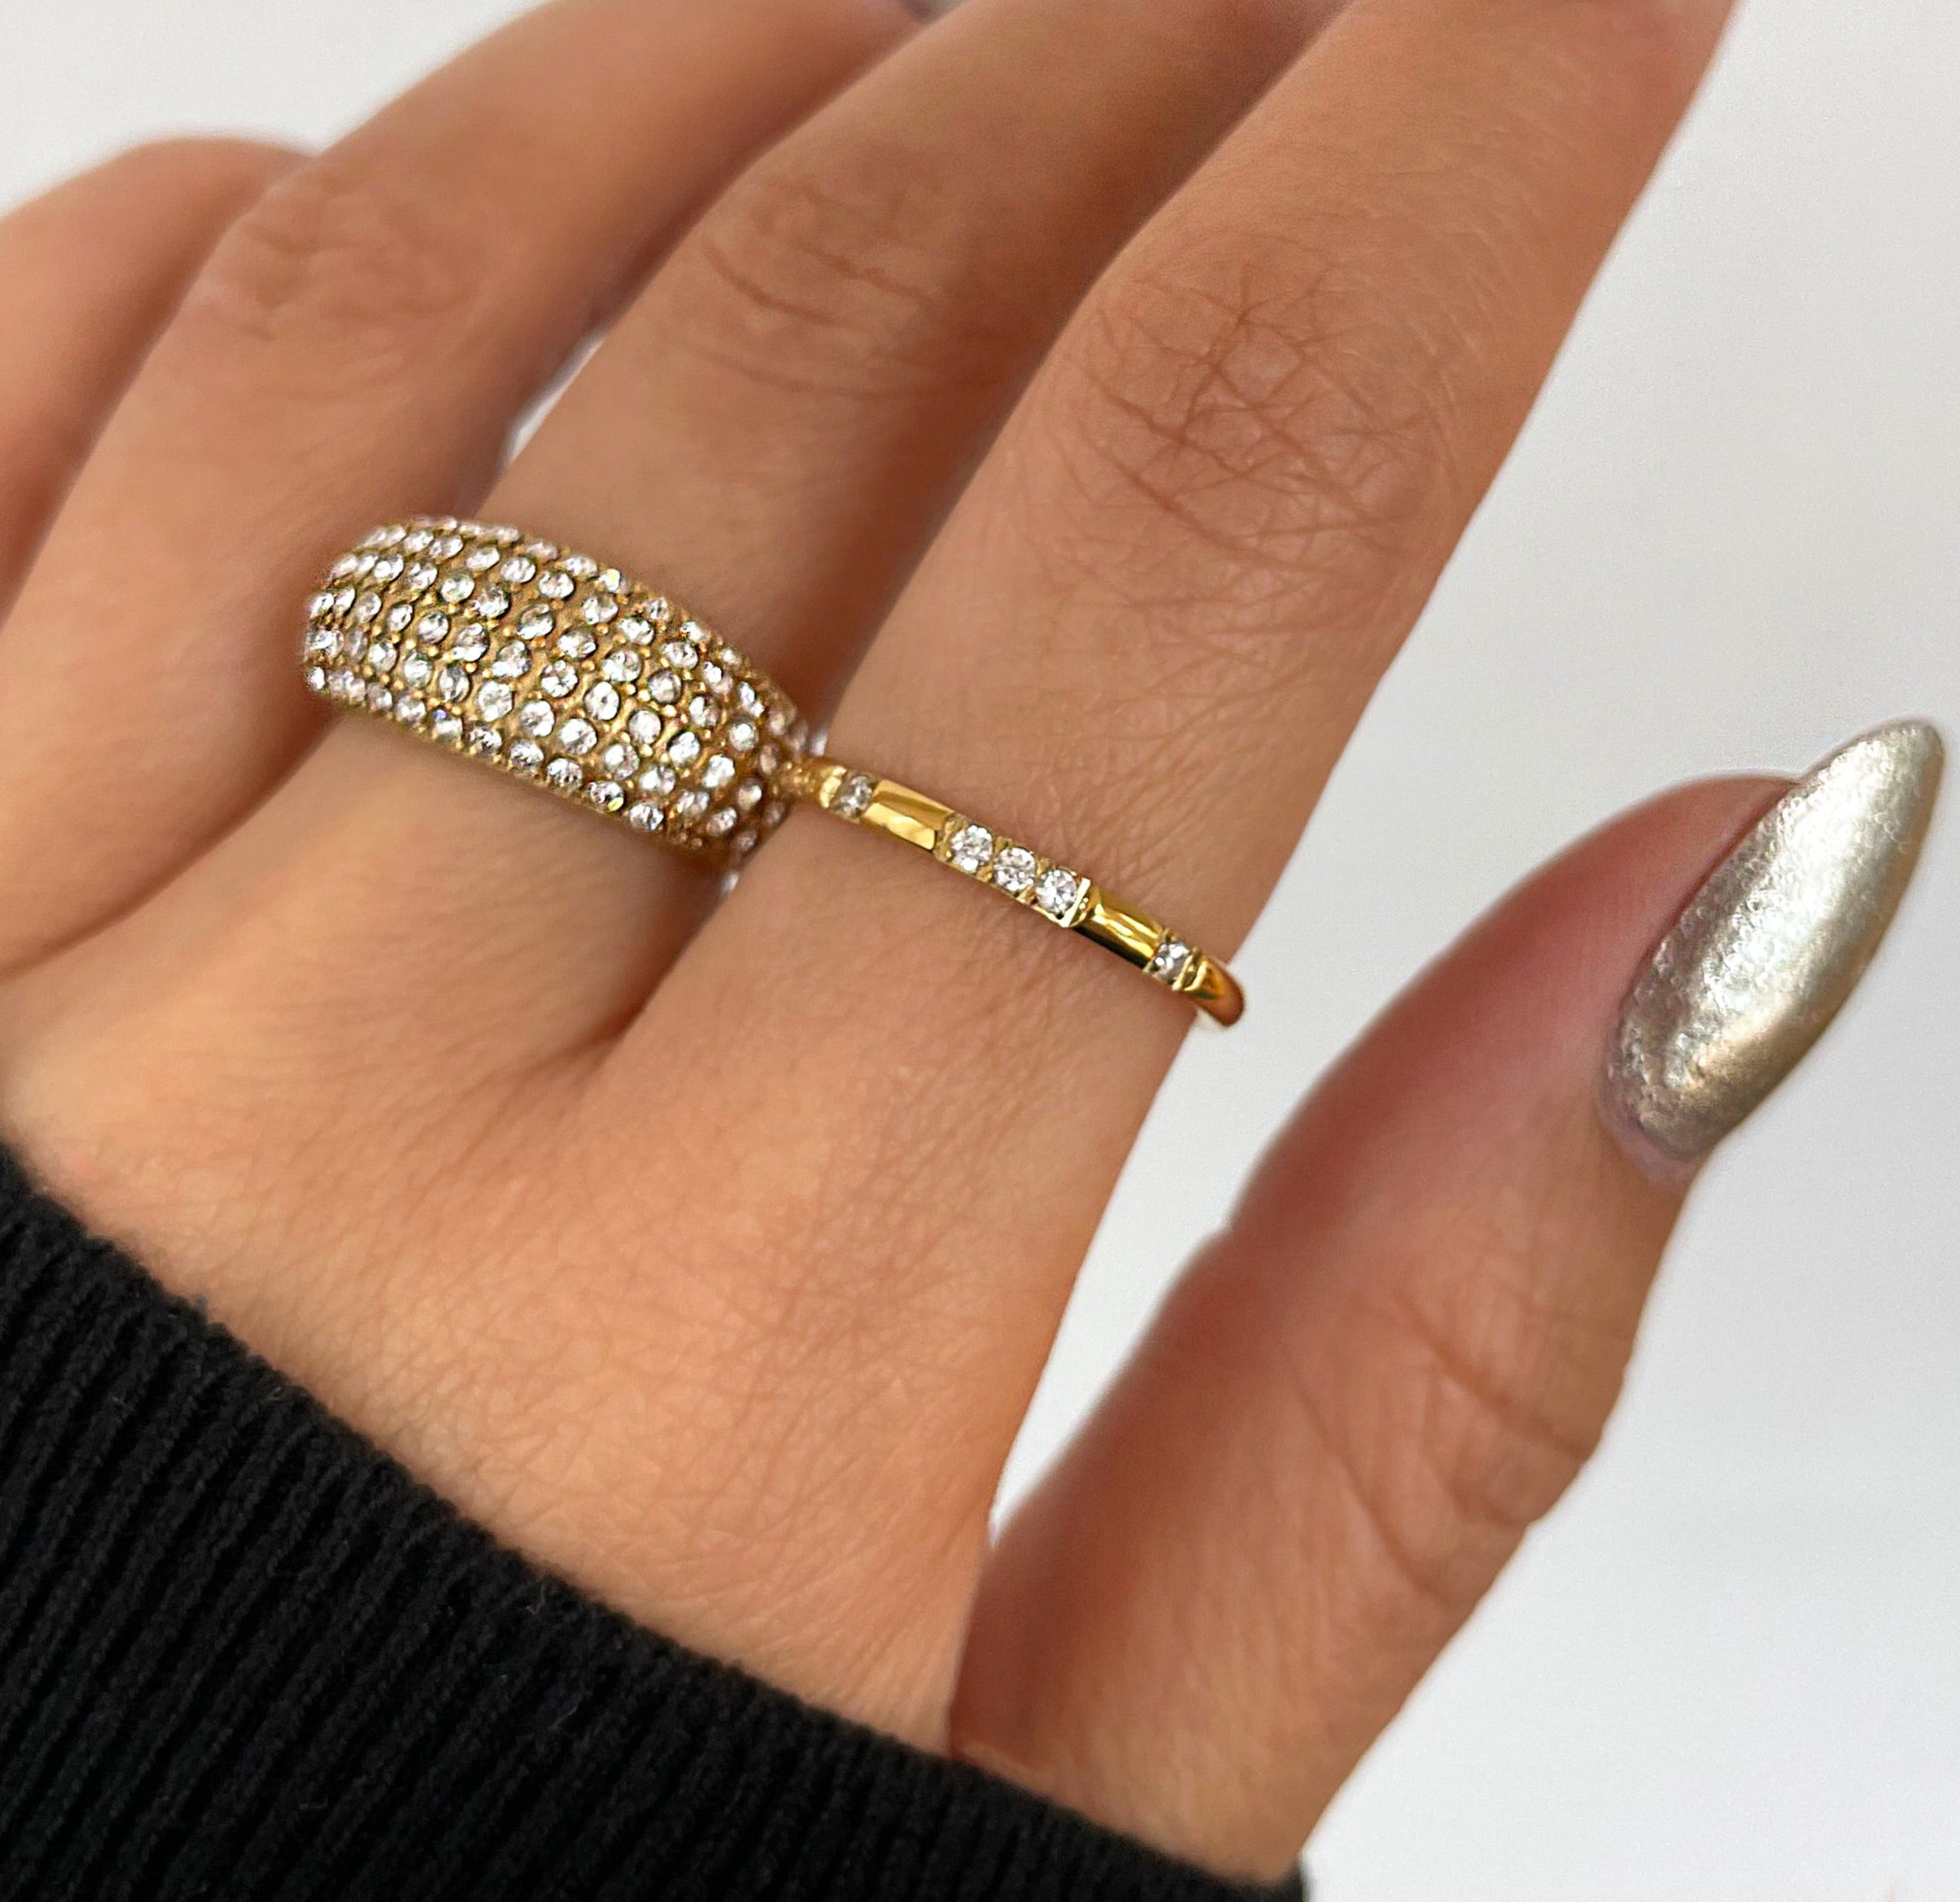 Veda thin gold pave ring band. paired with gold dome pave ring. Gold waterproof jewelry